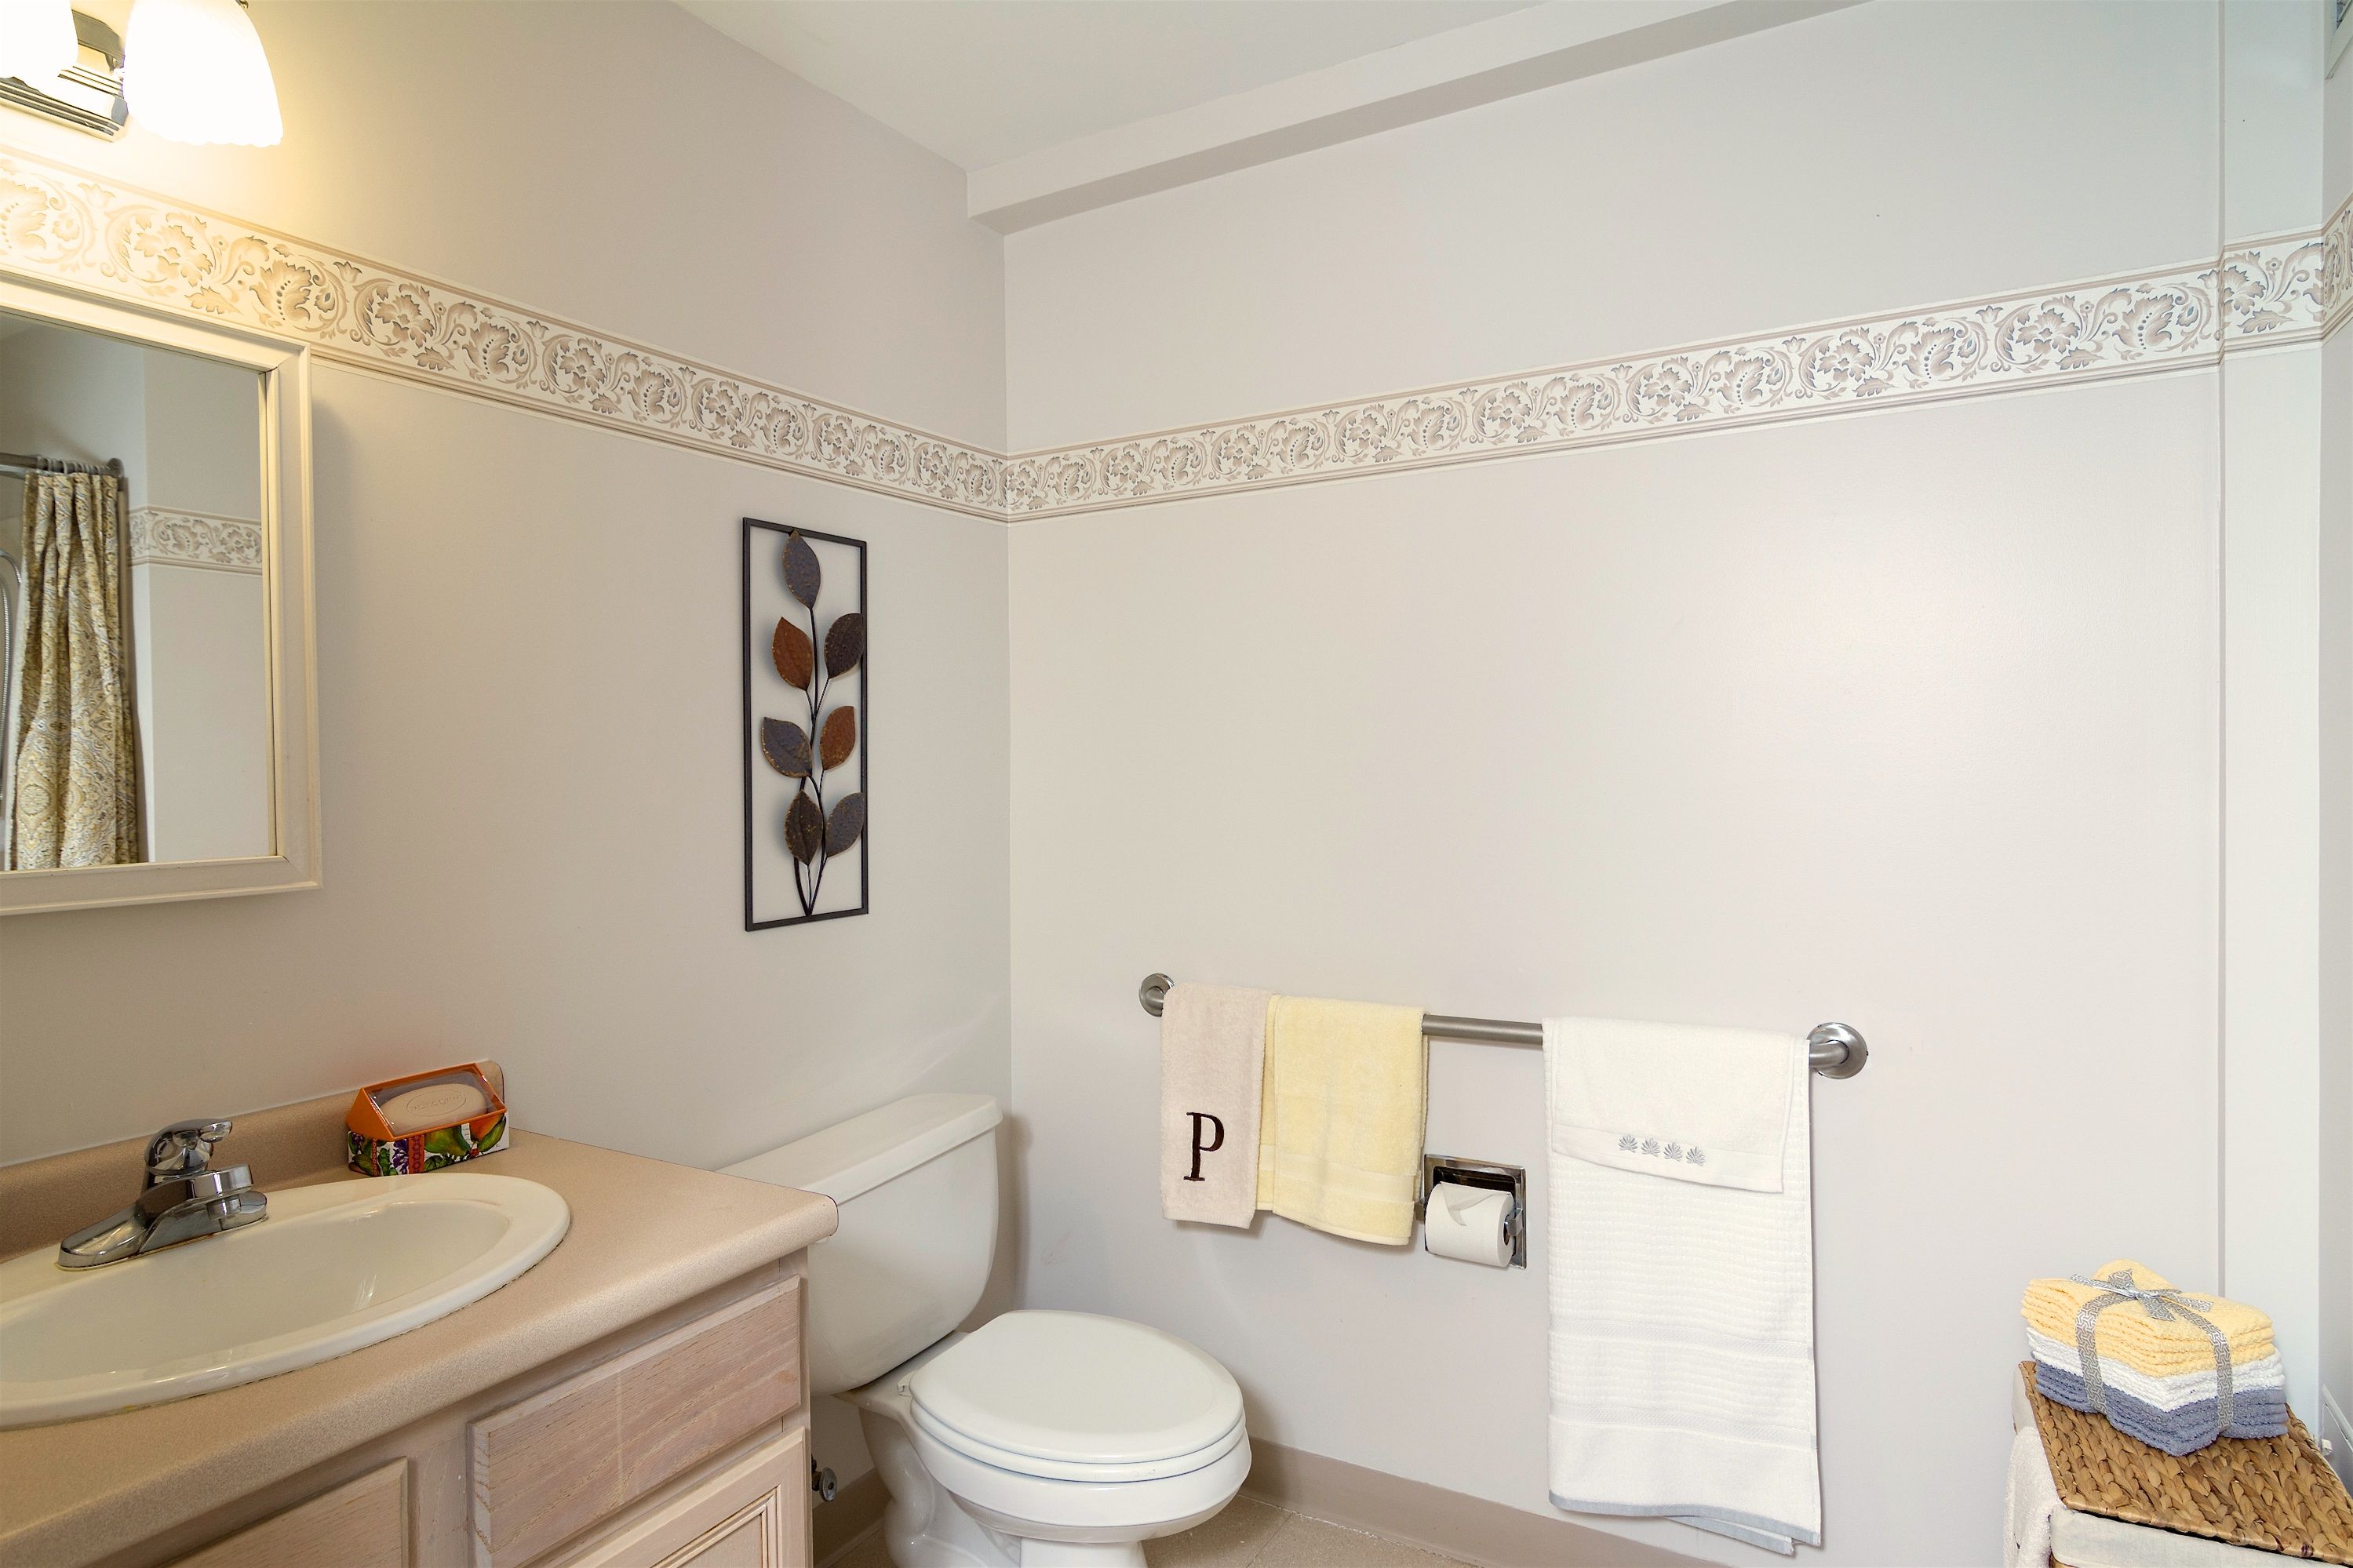 Interior view of Pacifica Senior Living Victoria Court featuring a bathroom with art and accessories.